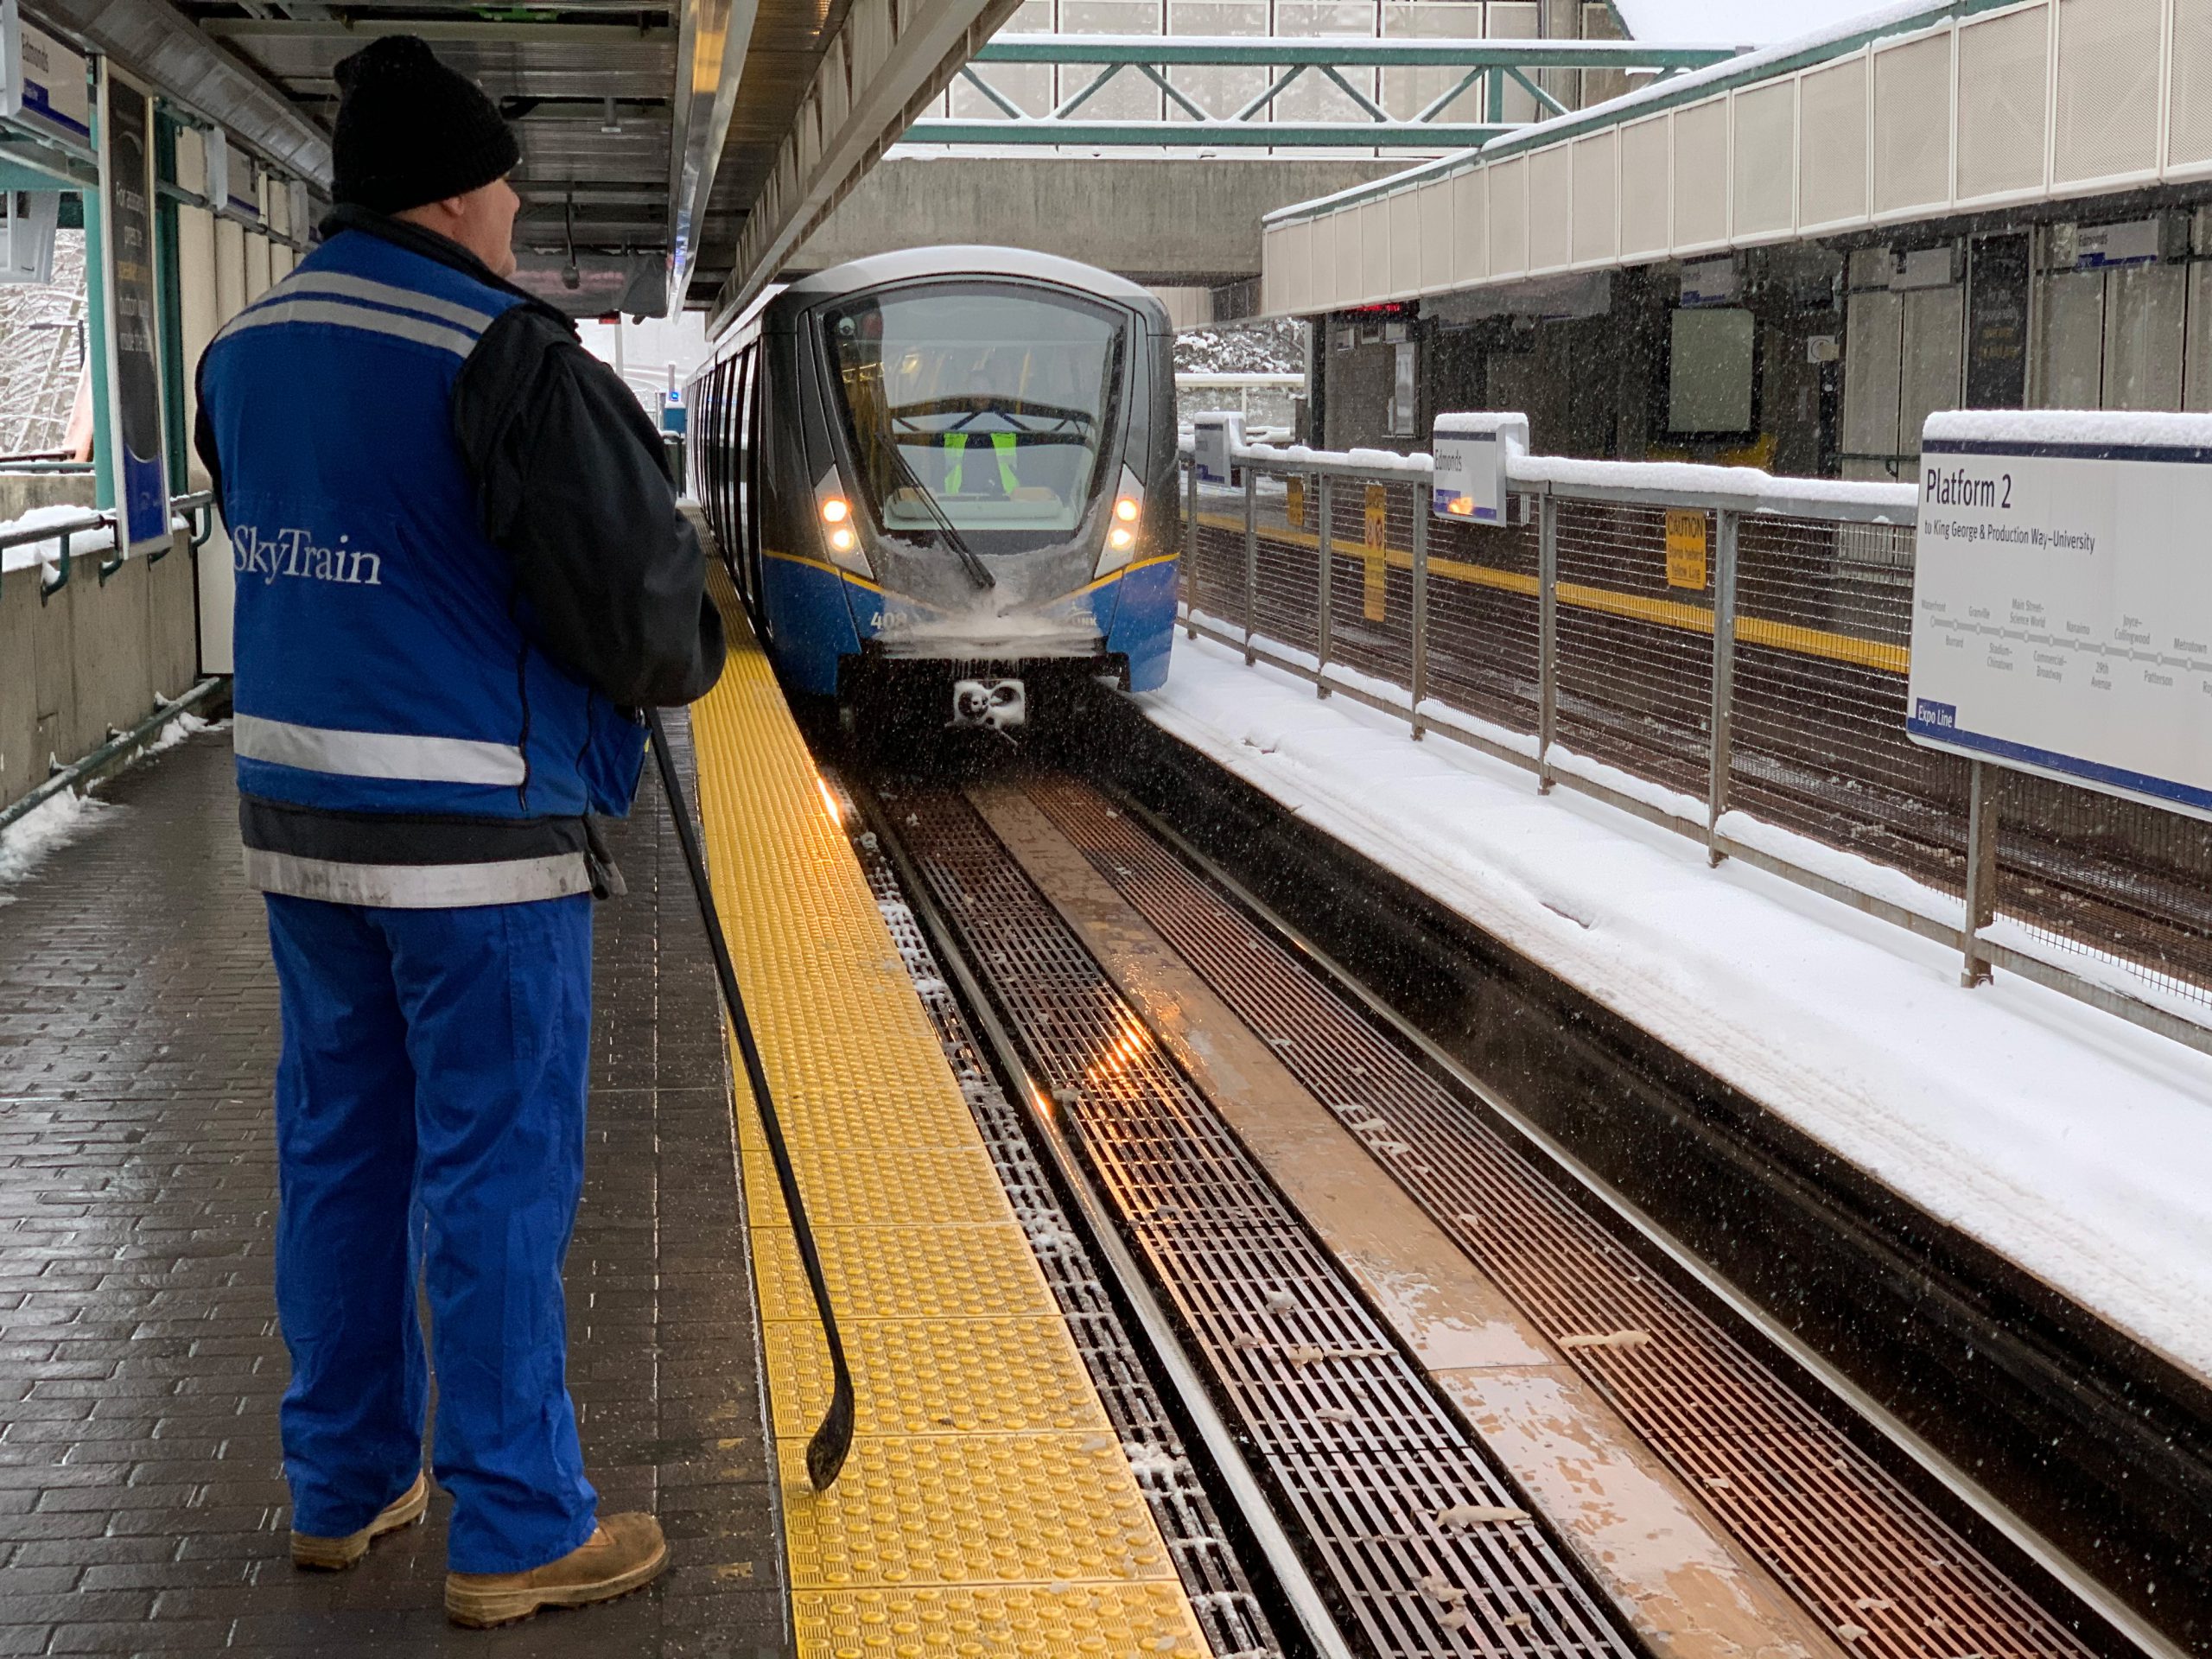 A SkyTrain technician prepares to clear snow and ice from the doors of the arriving SkyTrain car